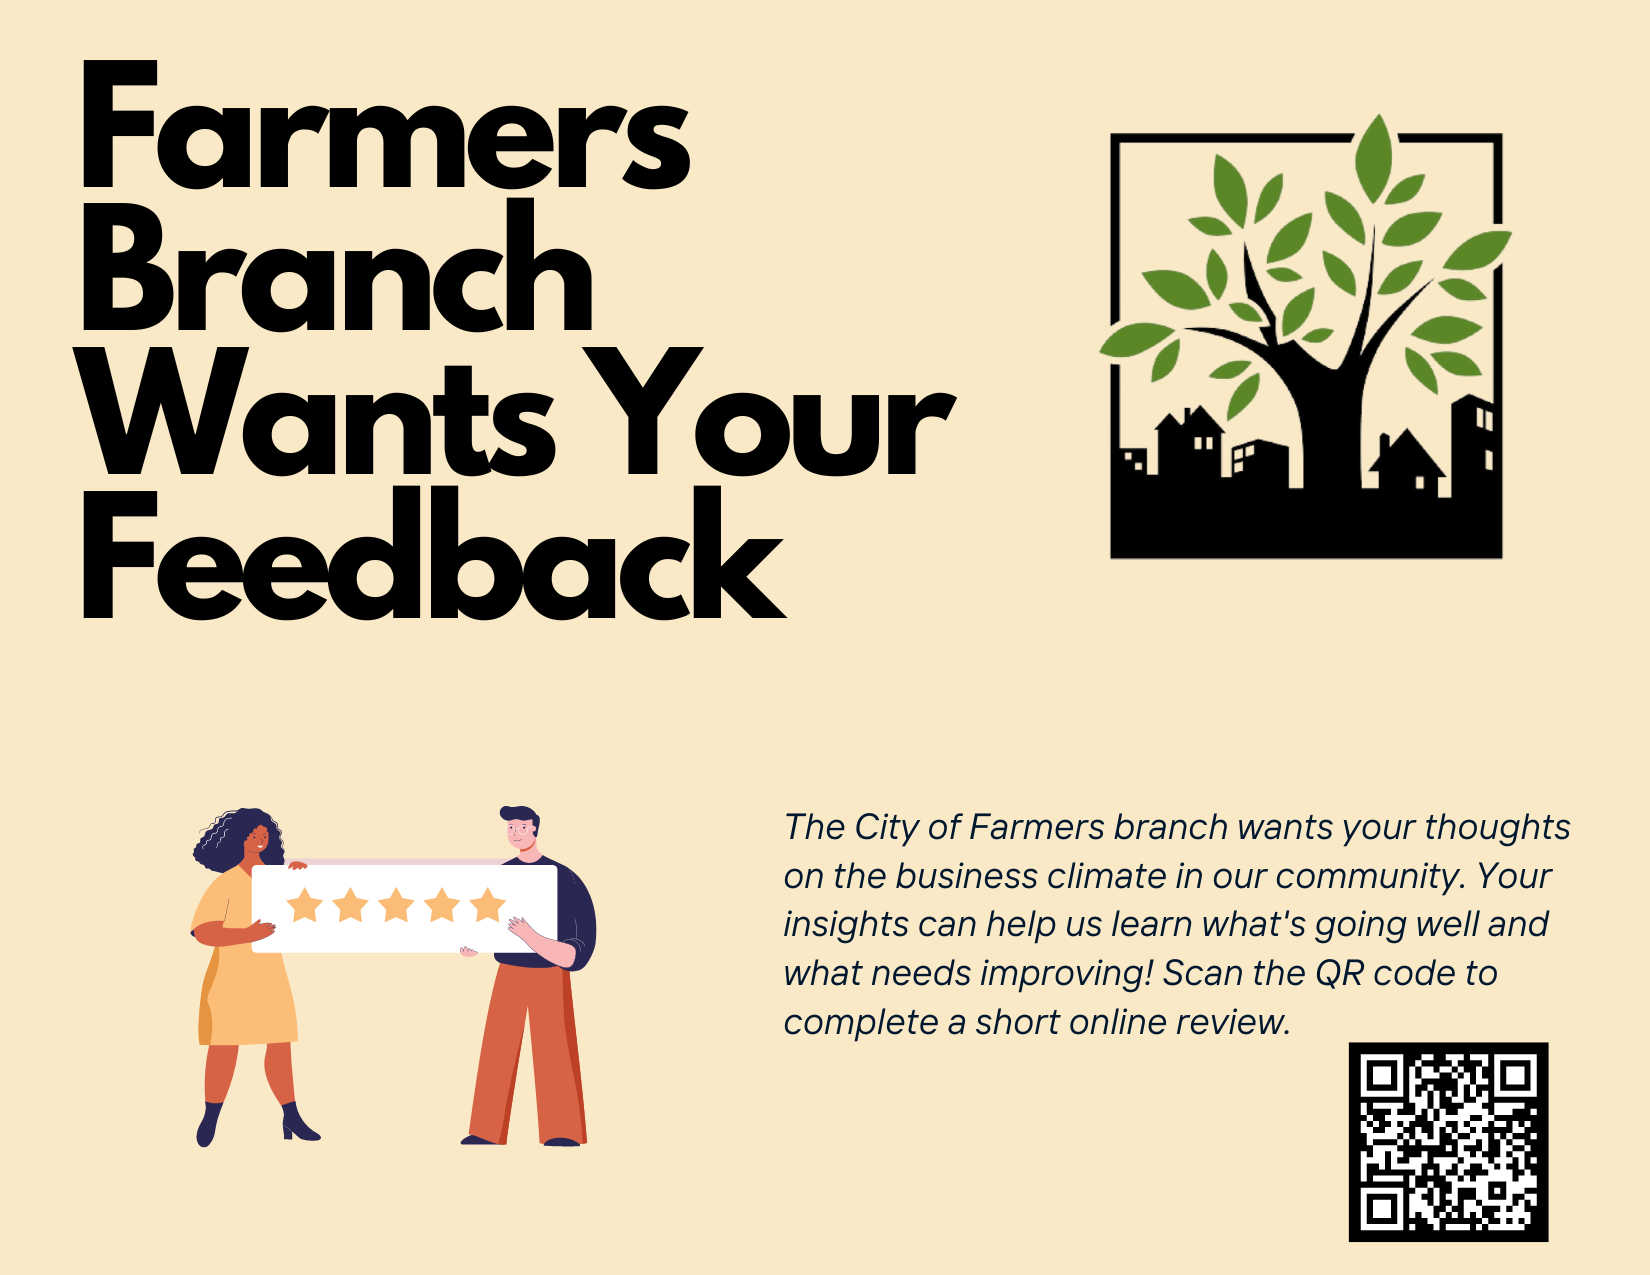 Voice of Farmers Branch